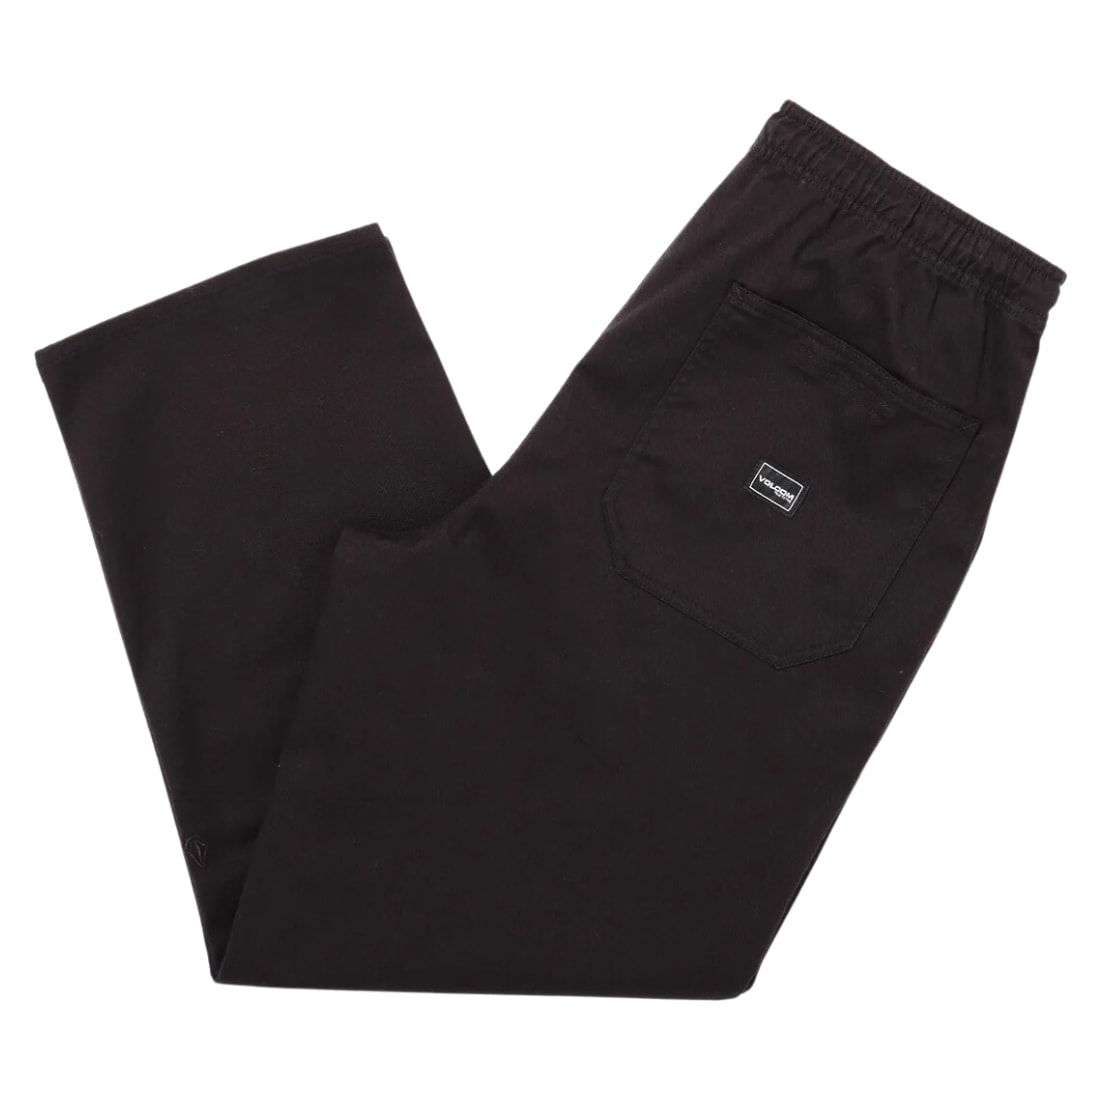 Volcom Outer Spaced Casual Pant - Black - Mens Chino Pants/Trousers by Volcom